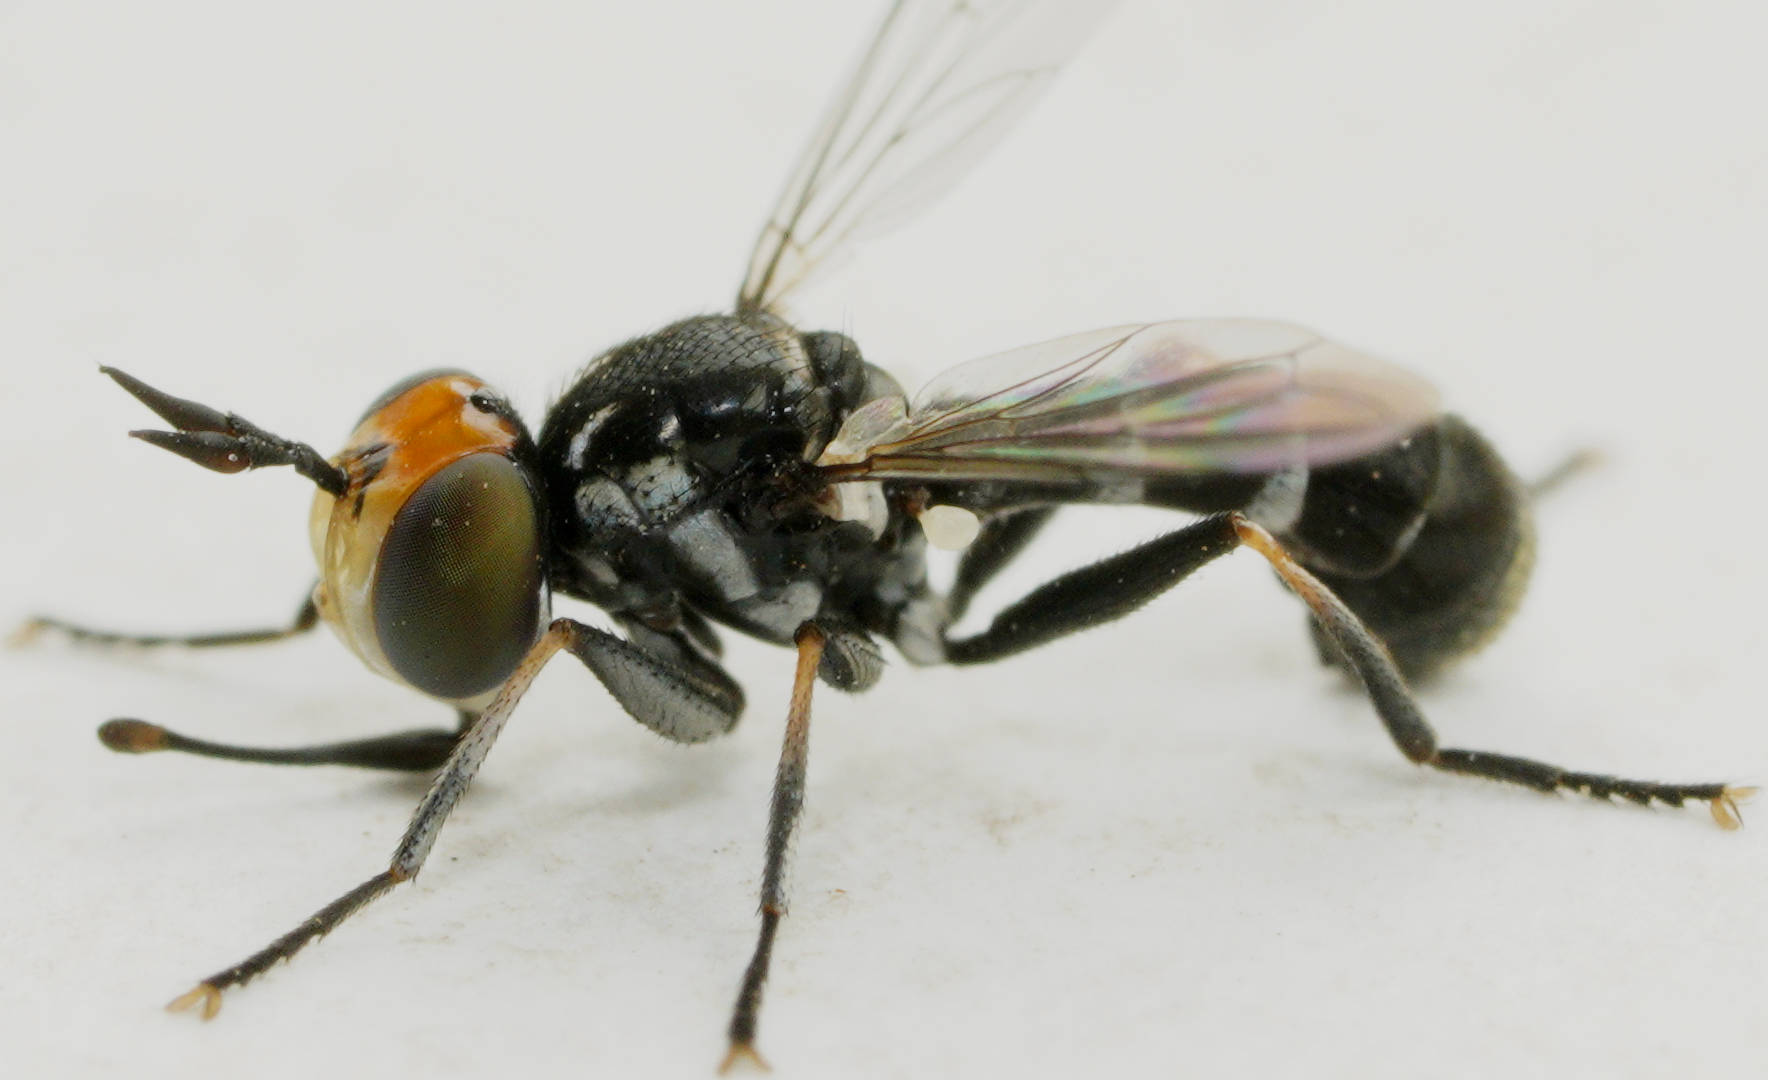 Orange-faced Thick-headed Fly (Microconops sp)